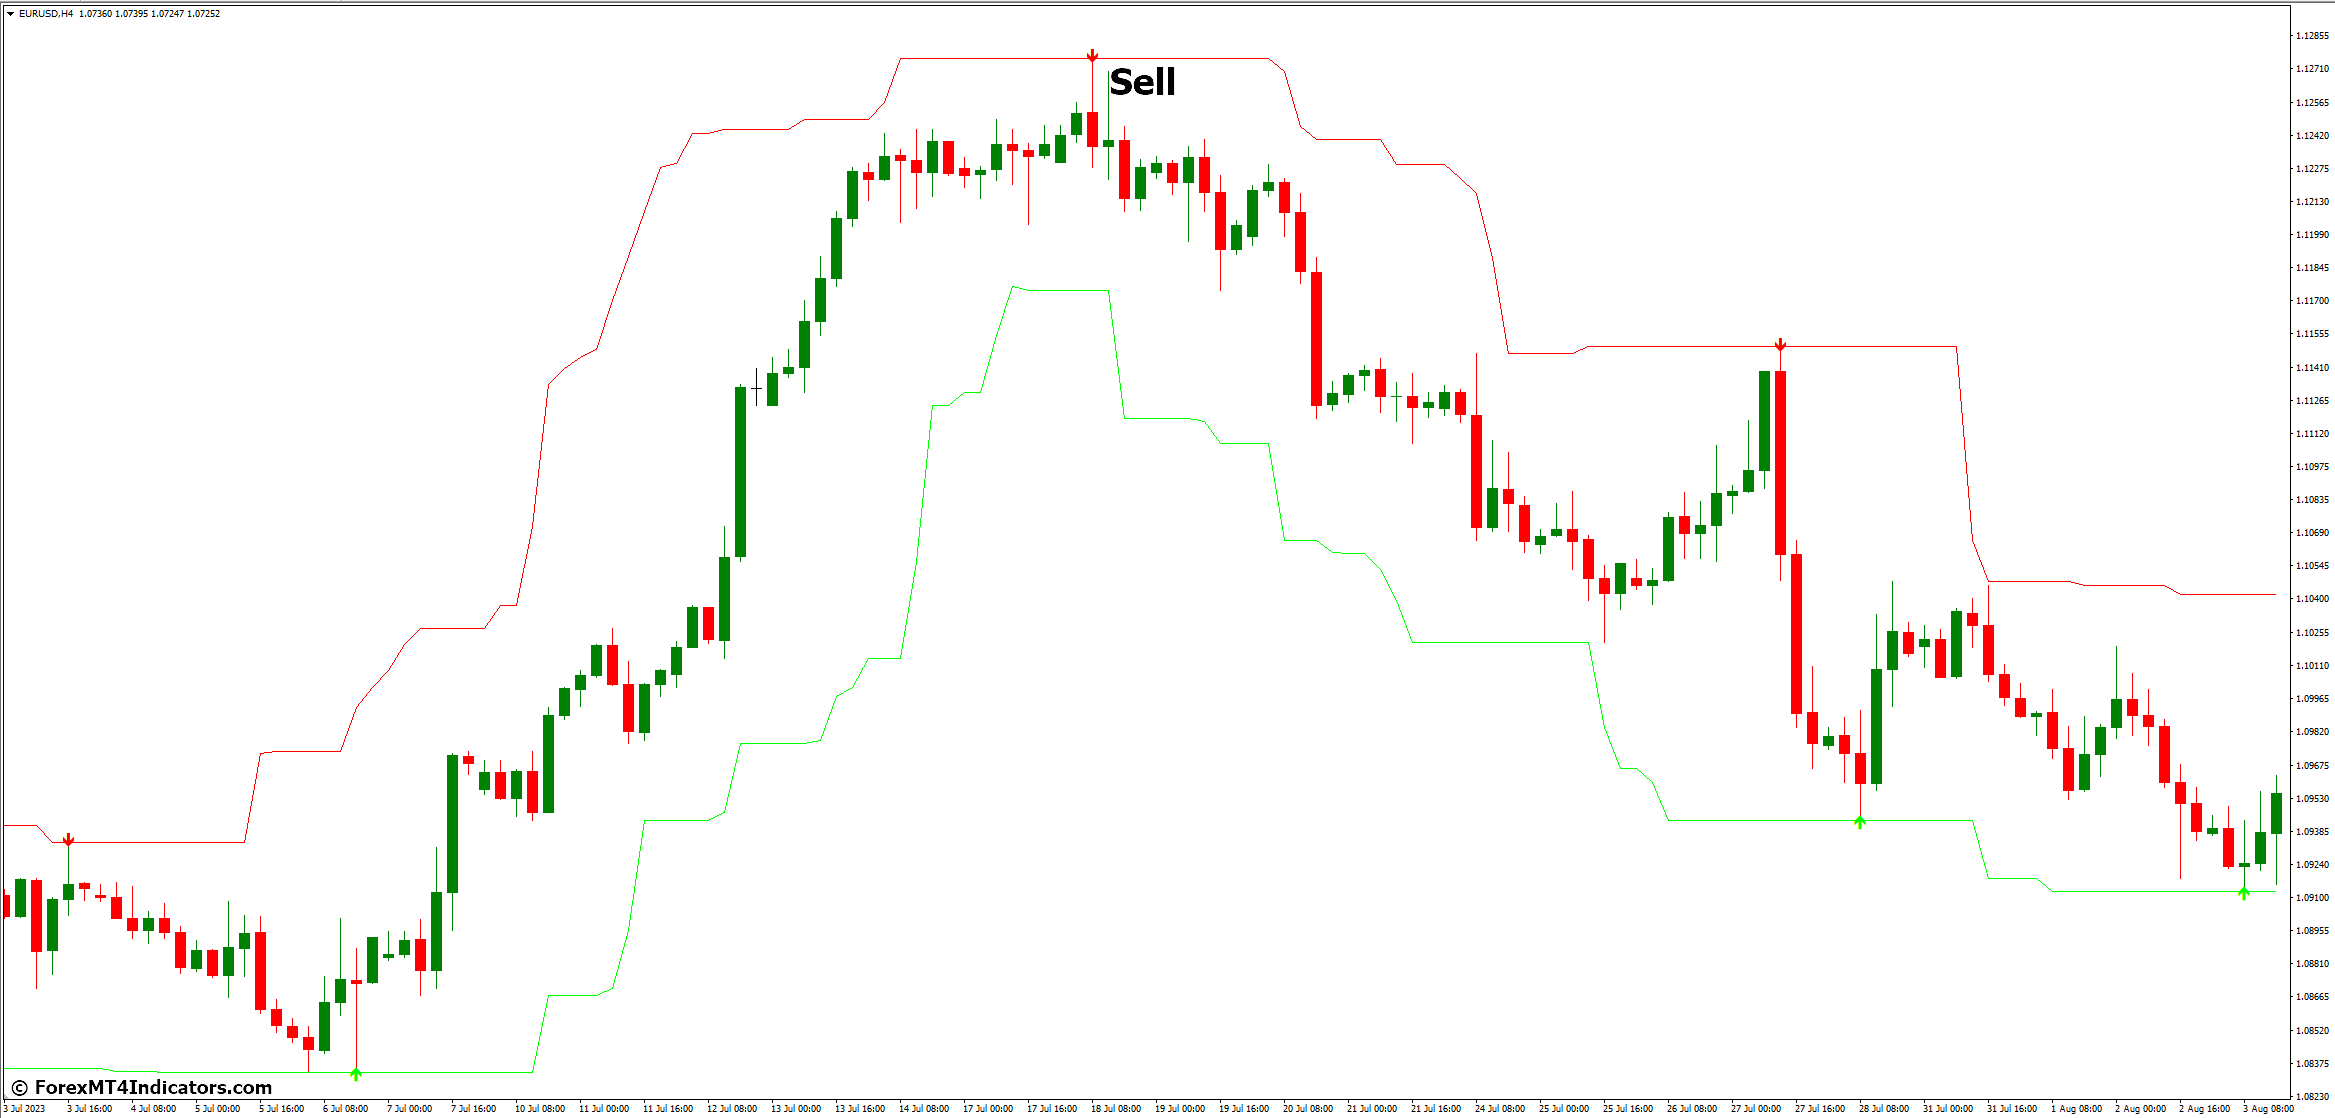 How to Trade with Forex Signals MT4 Indicator - Sell Entry